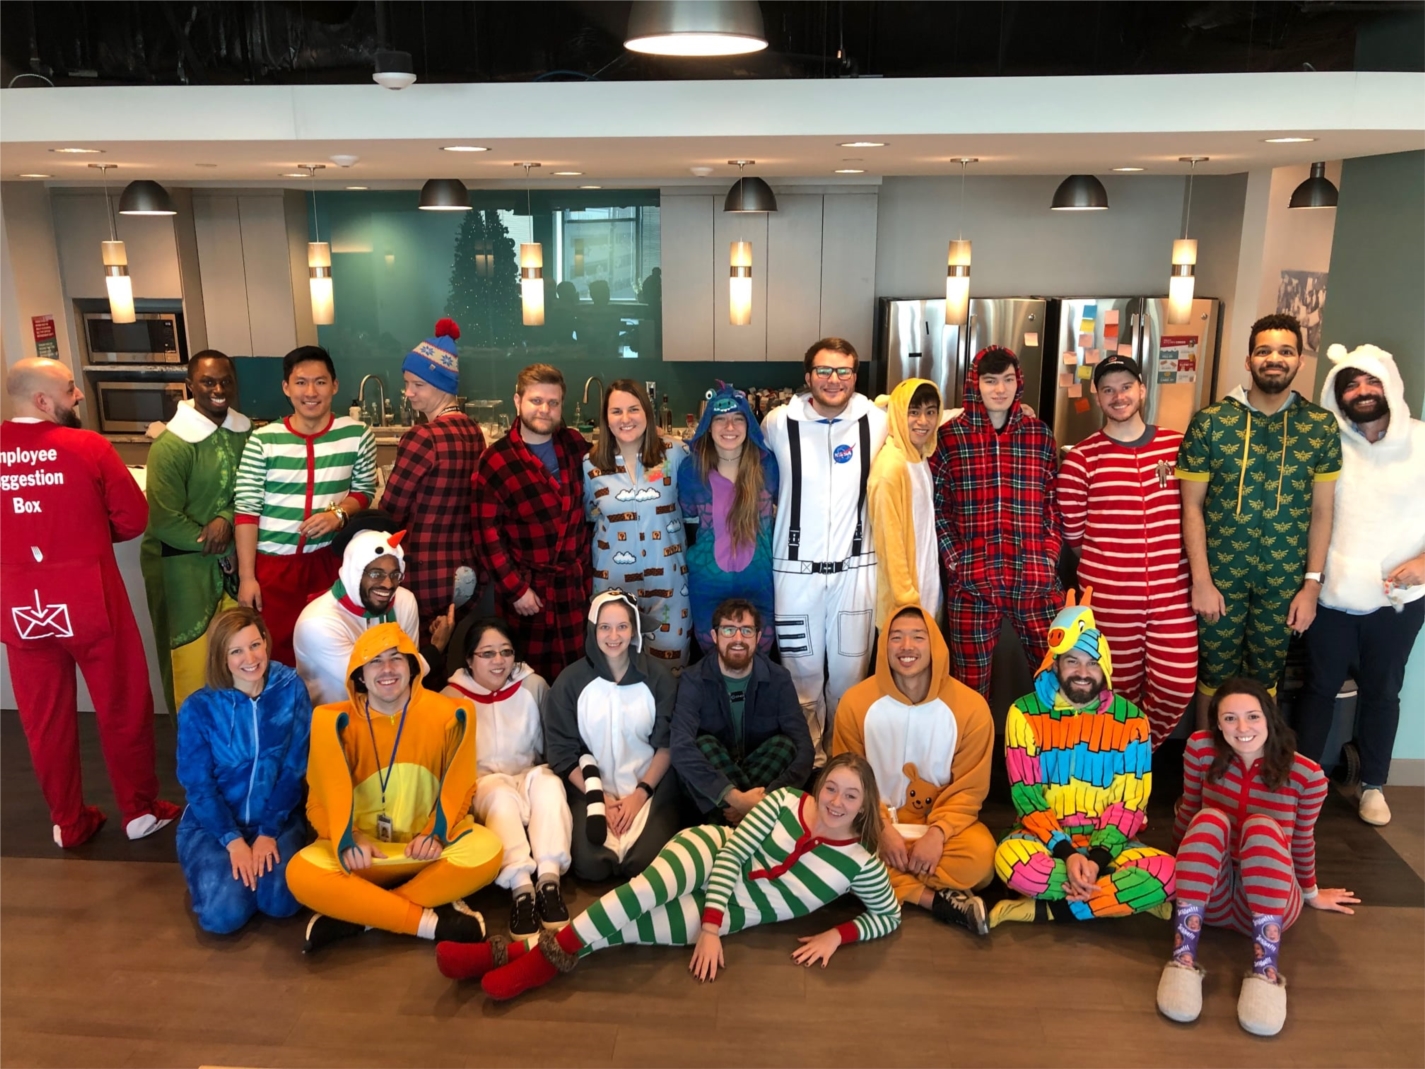 Onesie day is an annual holiday tradition 